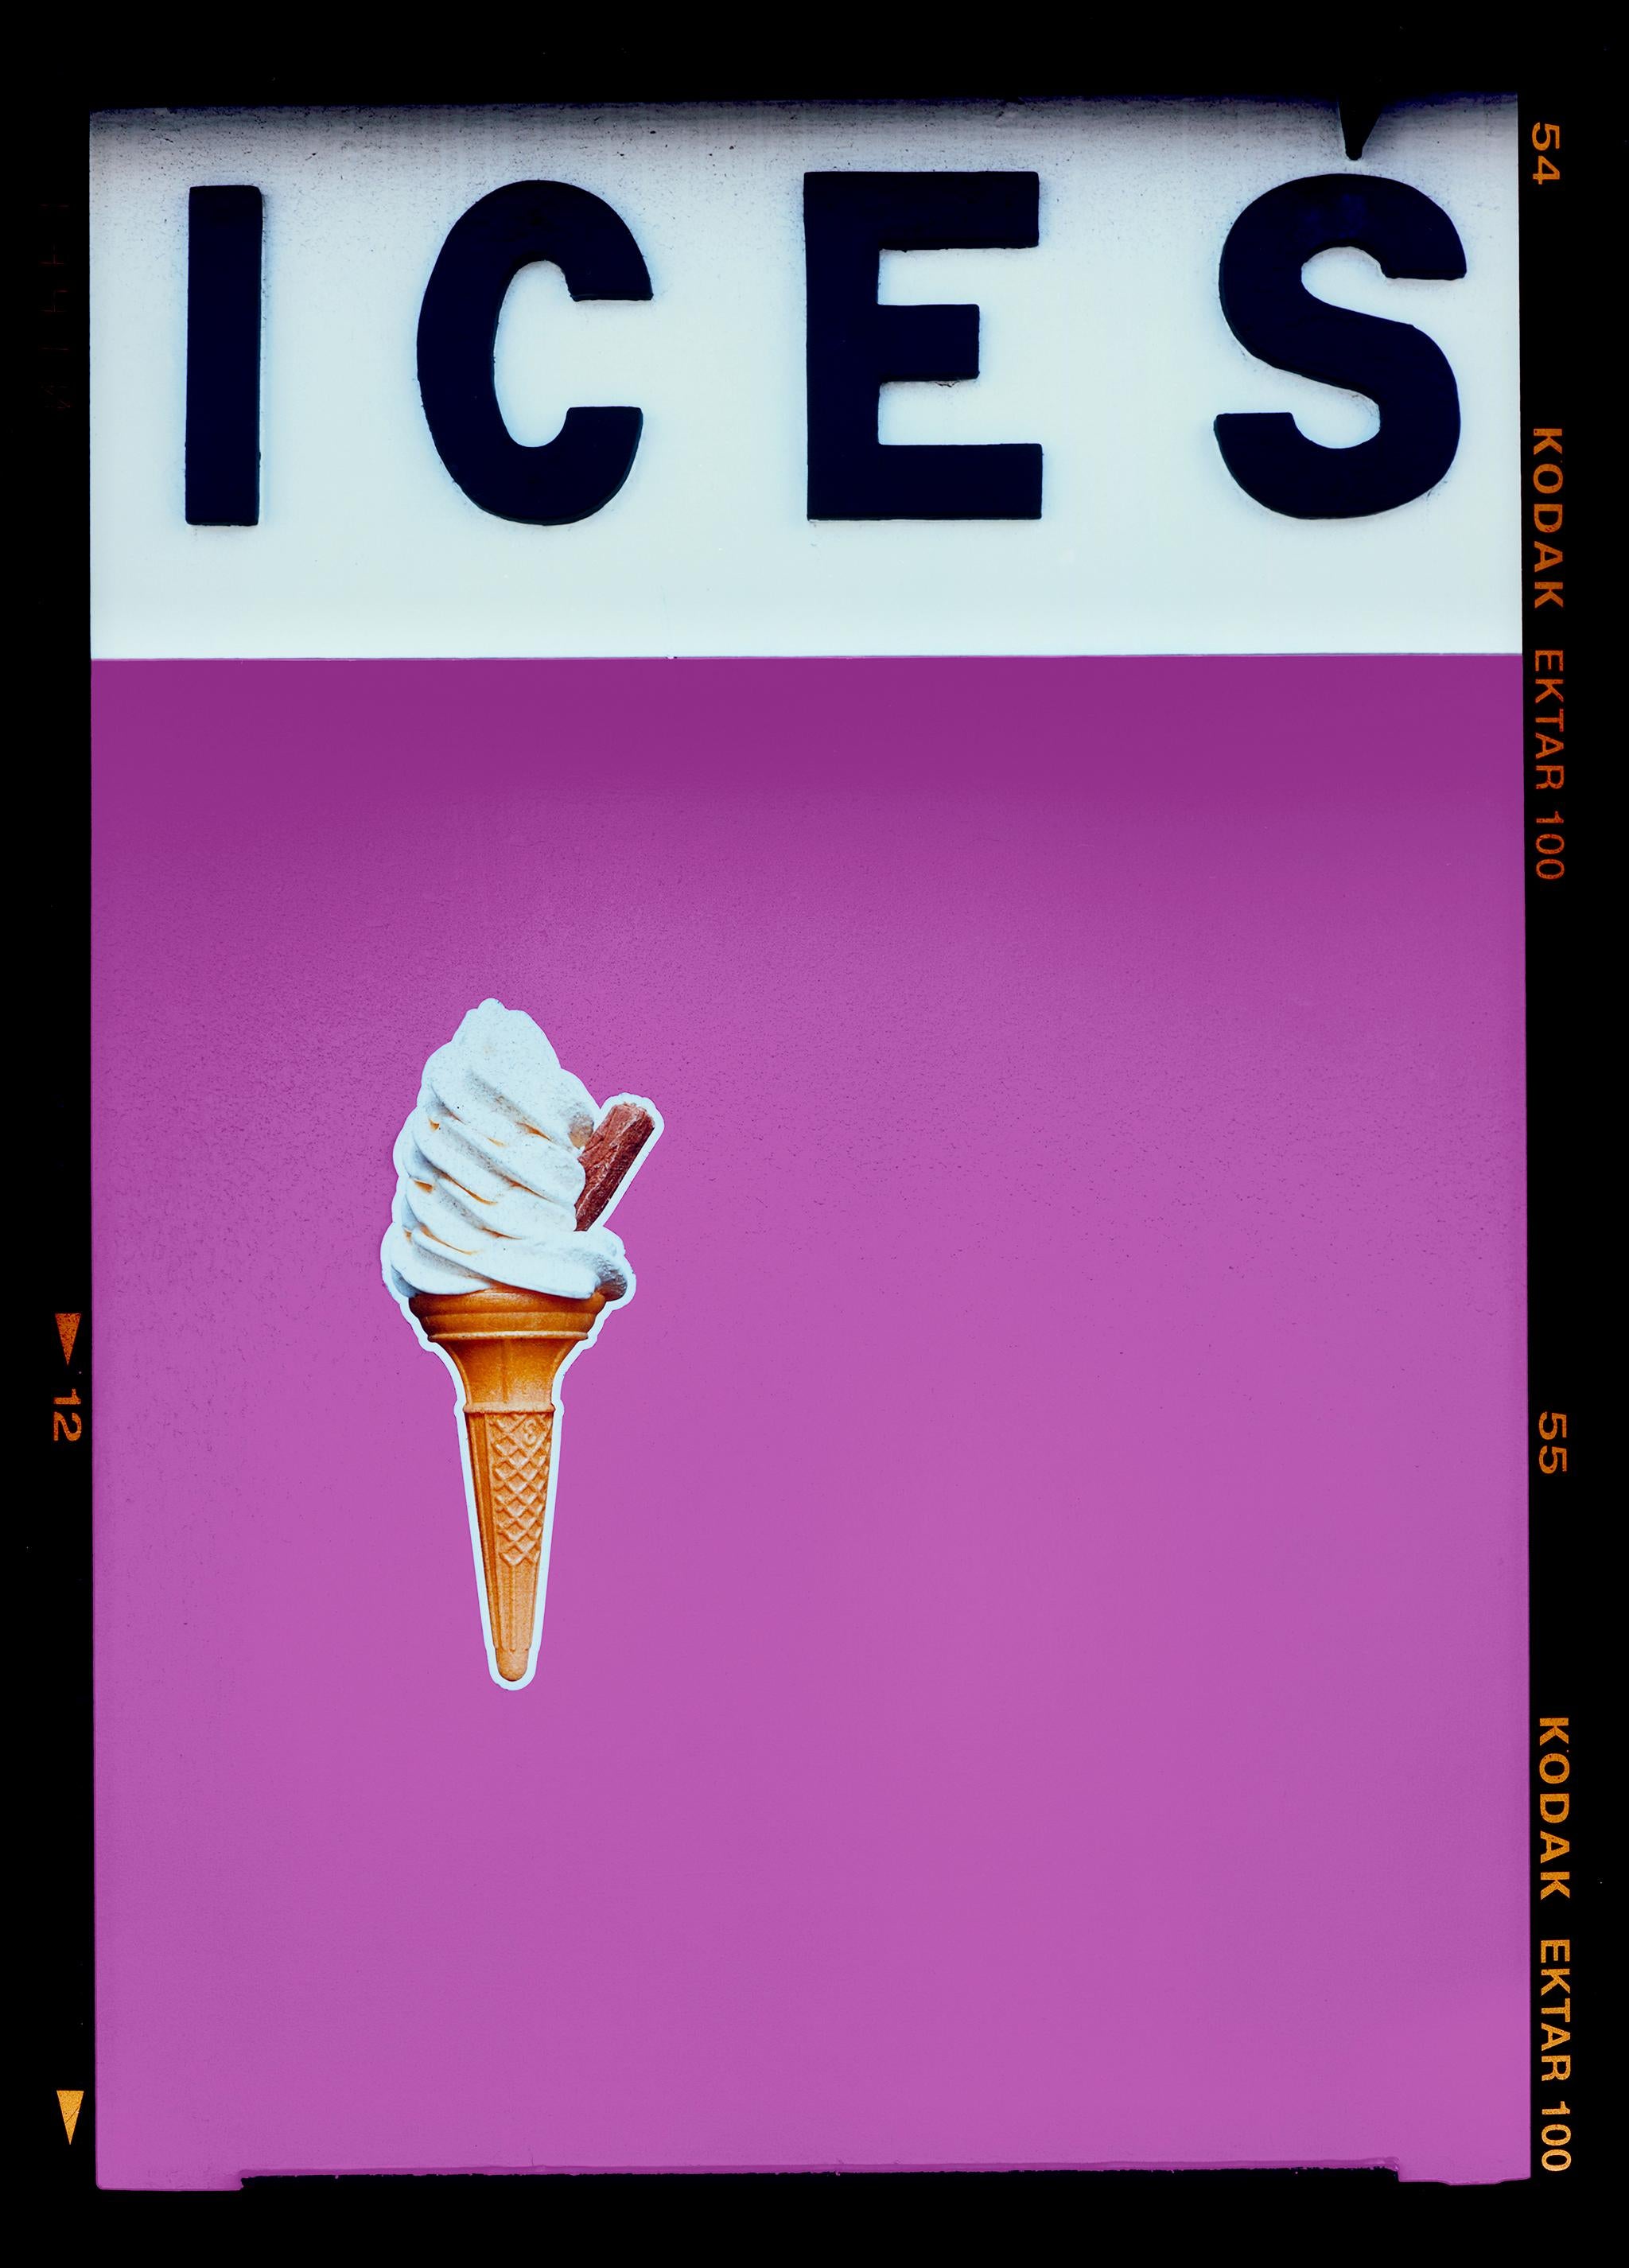 Richard Heeps Color Photograph - Ices (Plum), Bexhill-on-Sea - British seaside color photography